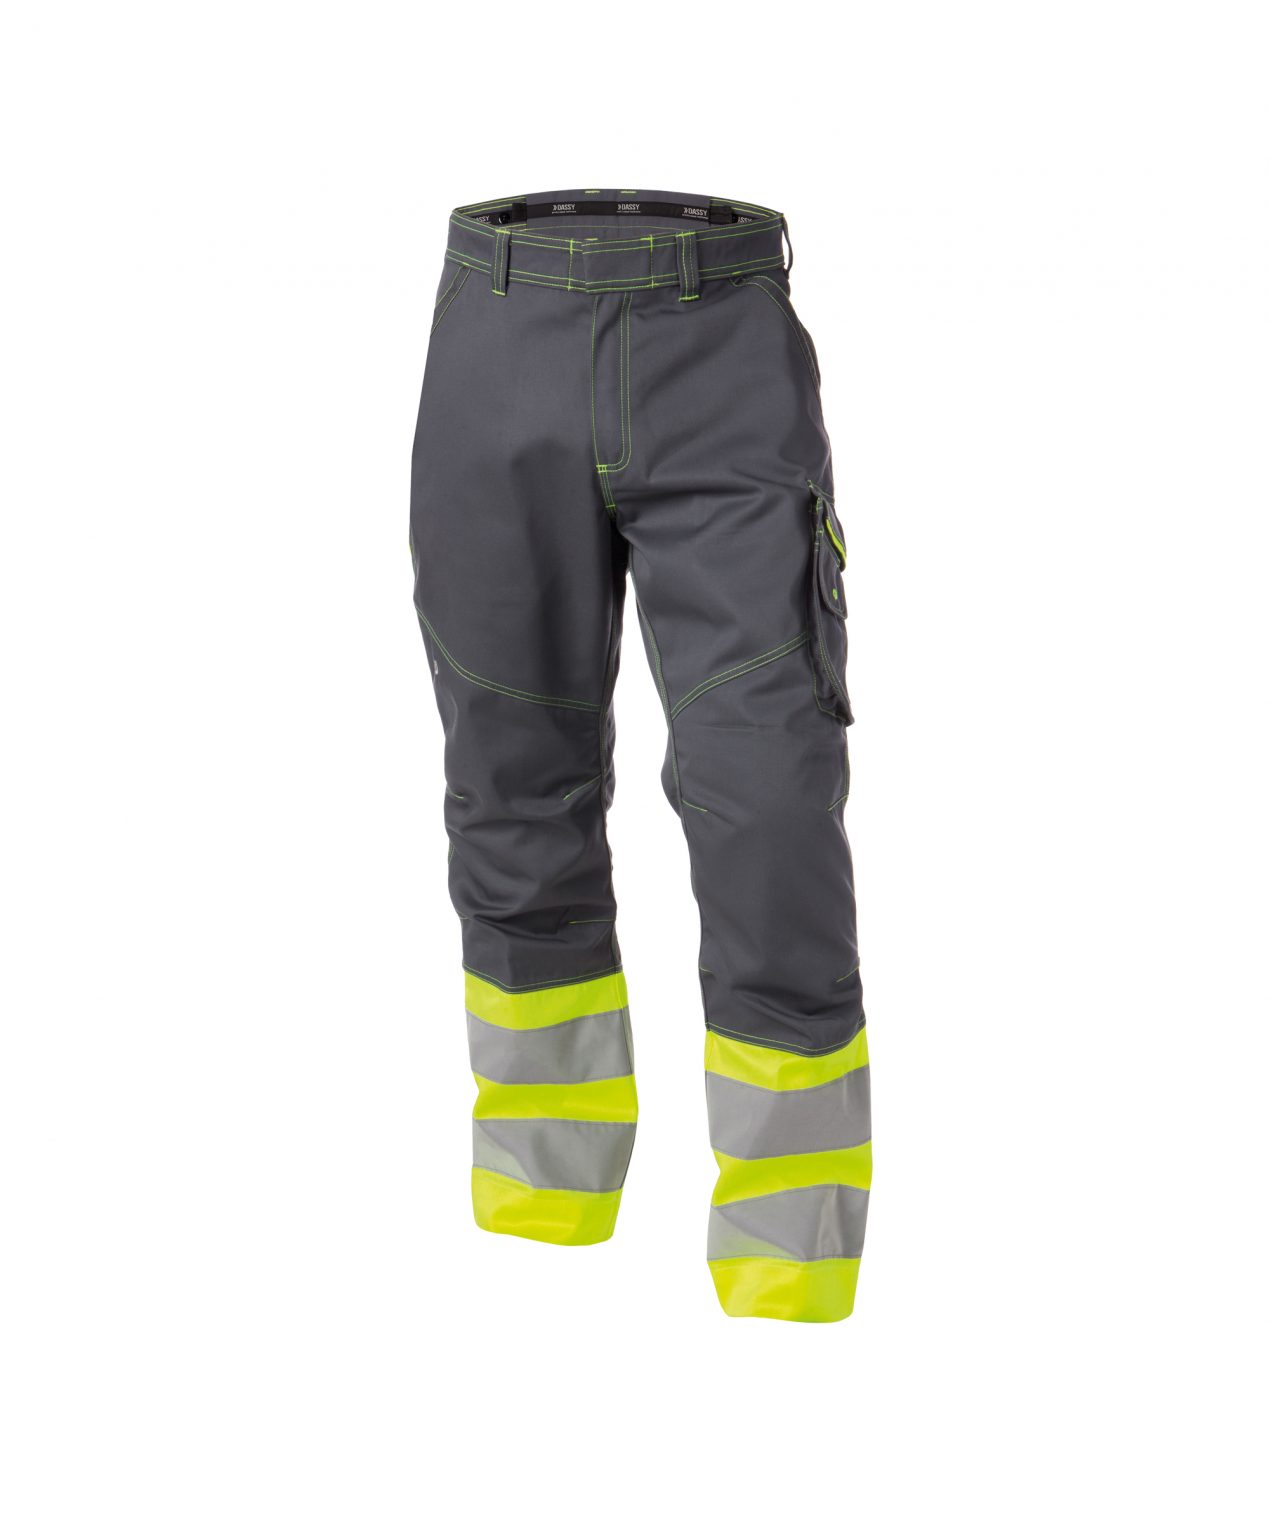 phoenix high visibility work trousers cement grey fluo yellow front